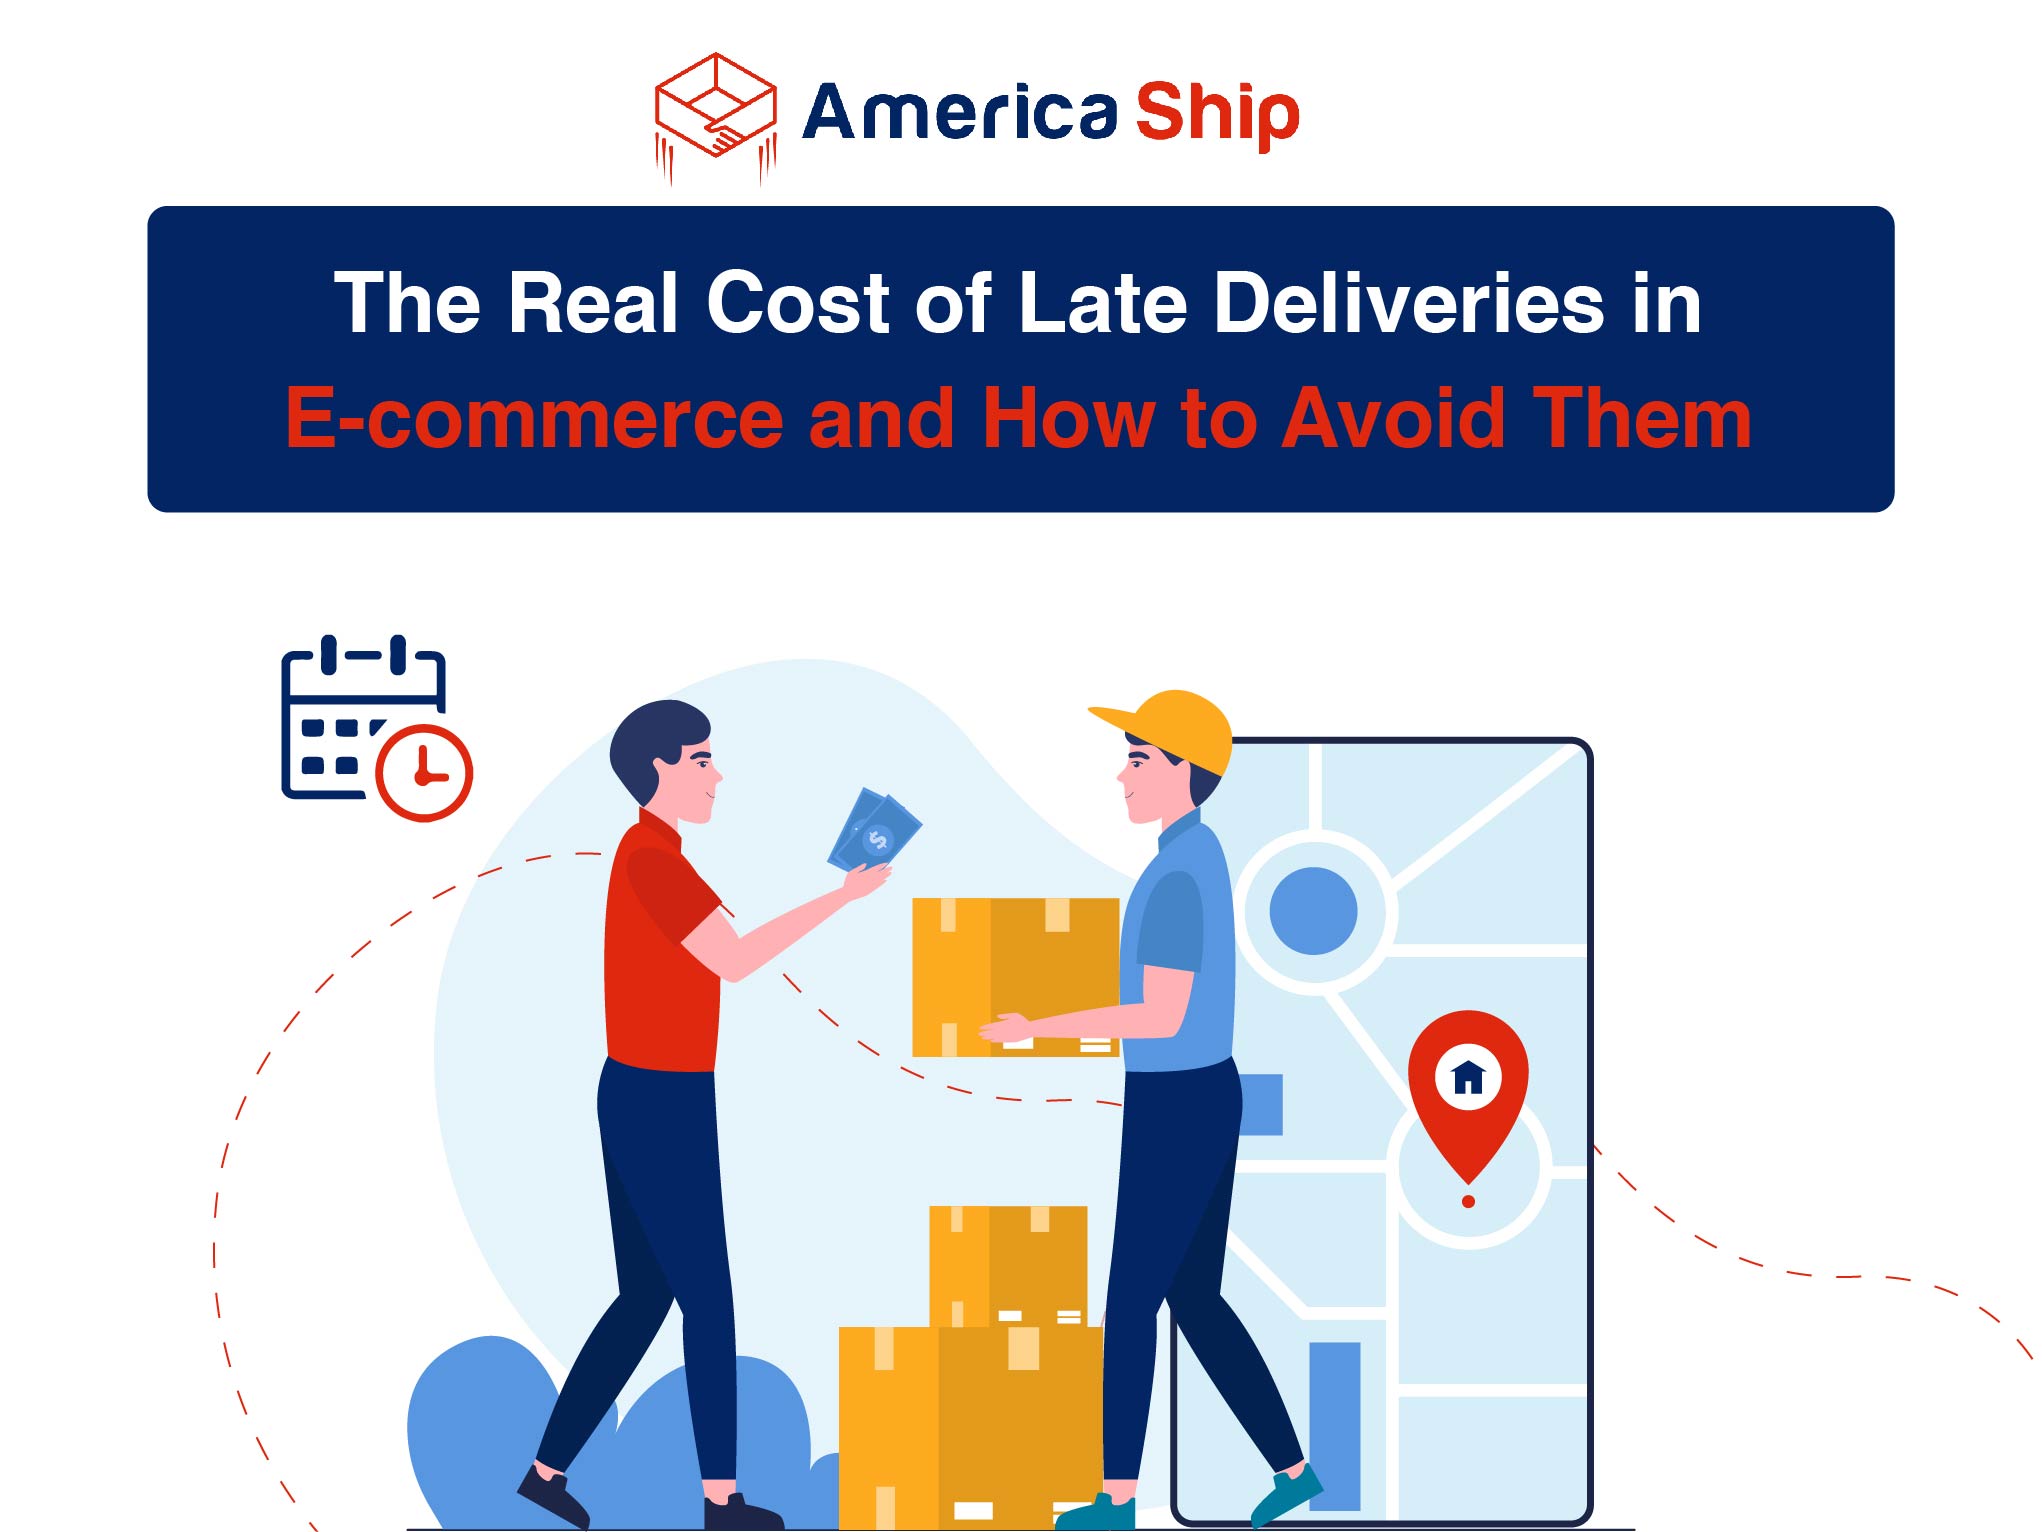 The Real Cost of Late Deliveries in E-commerce and How to Avoid Them